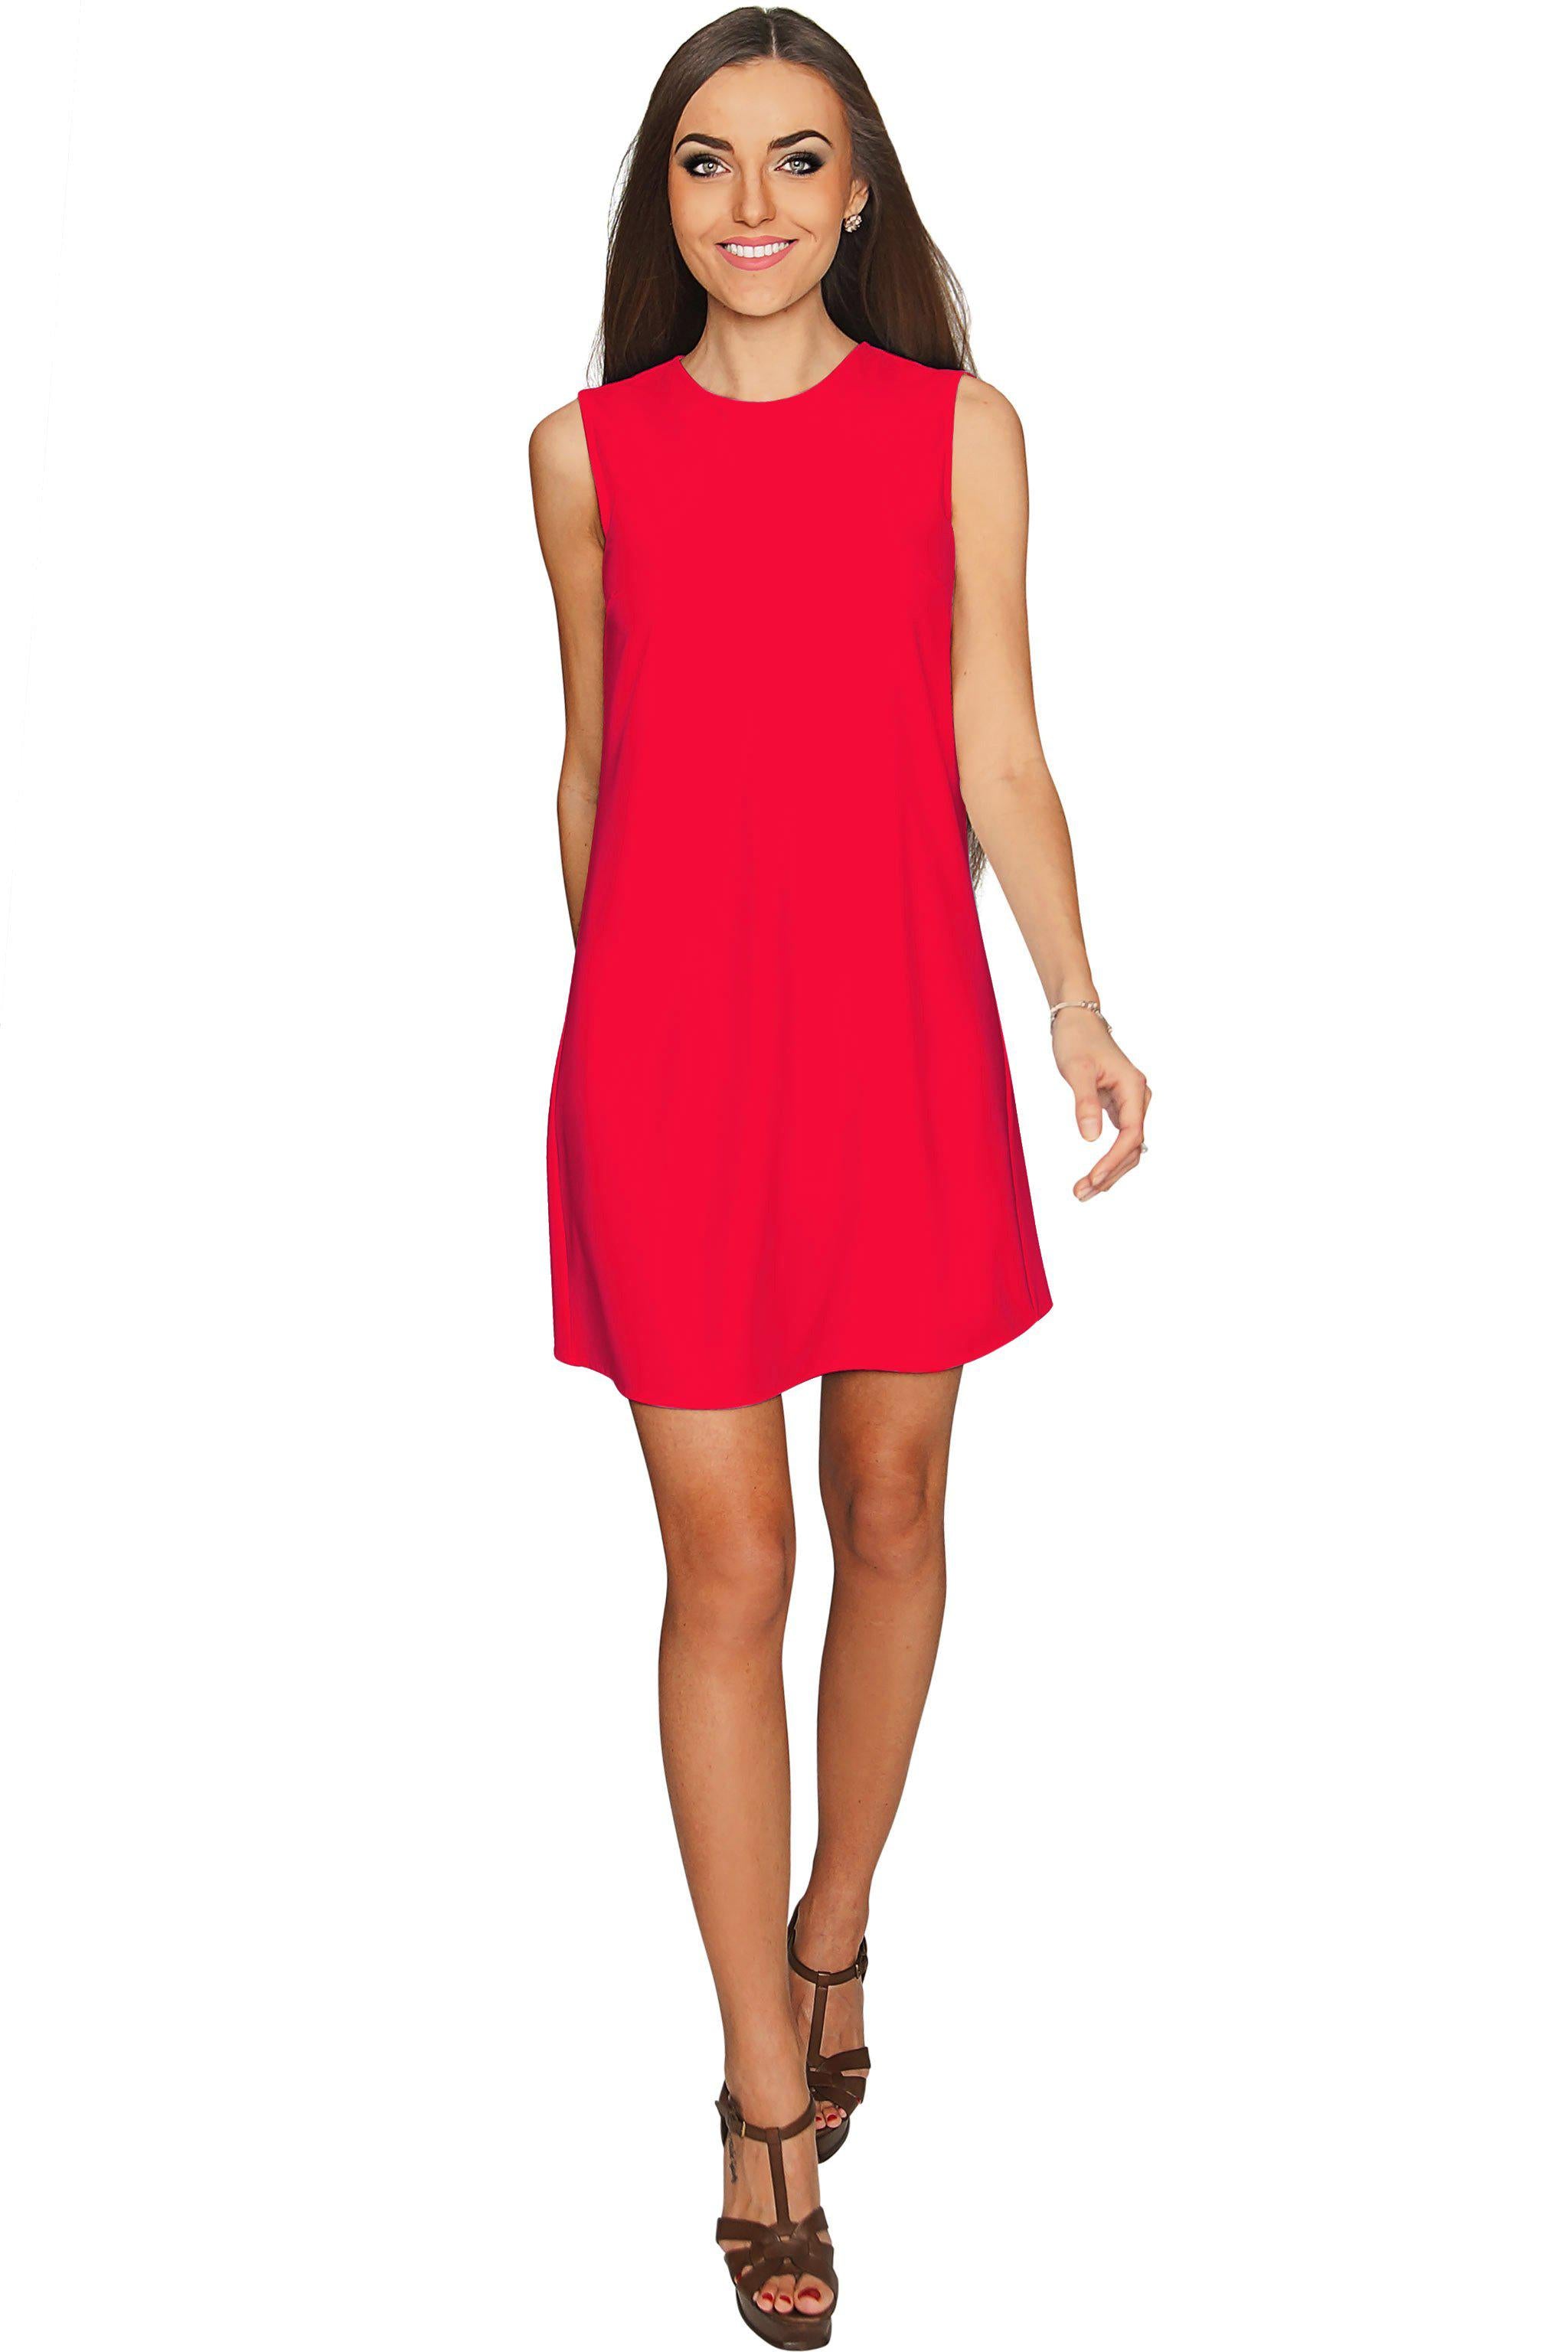 Cherry Red Sleeveless A-Line Trapeze Cocktail Shift Dress - Women - Pineapple Clothing